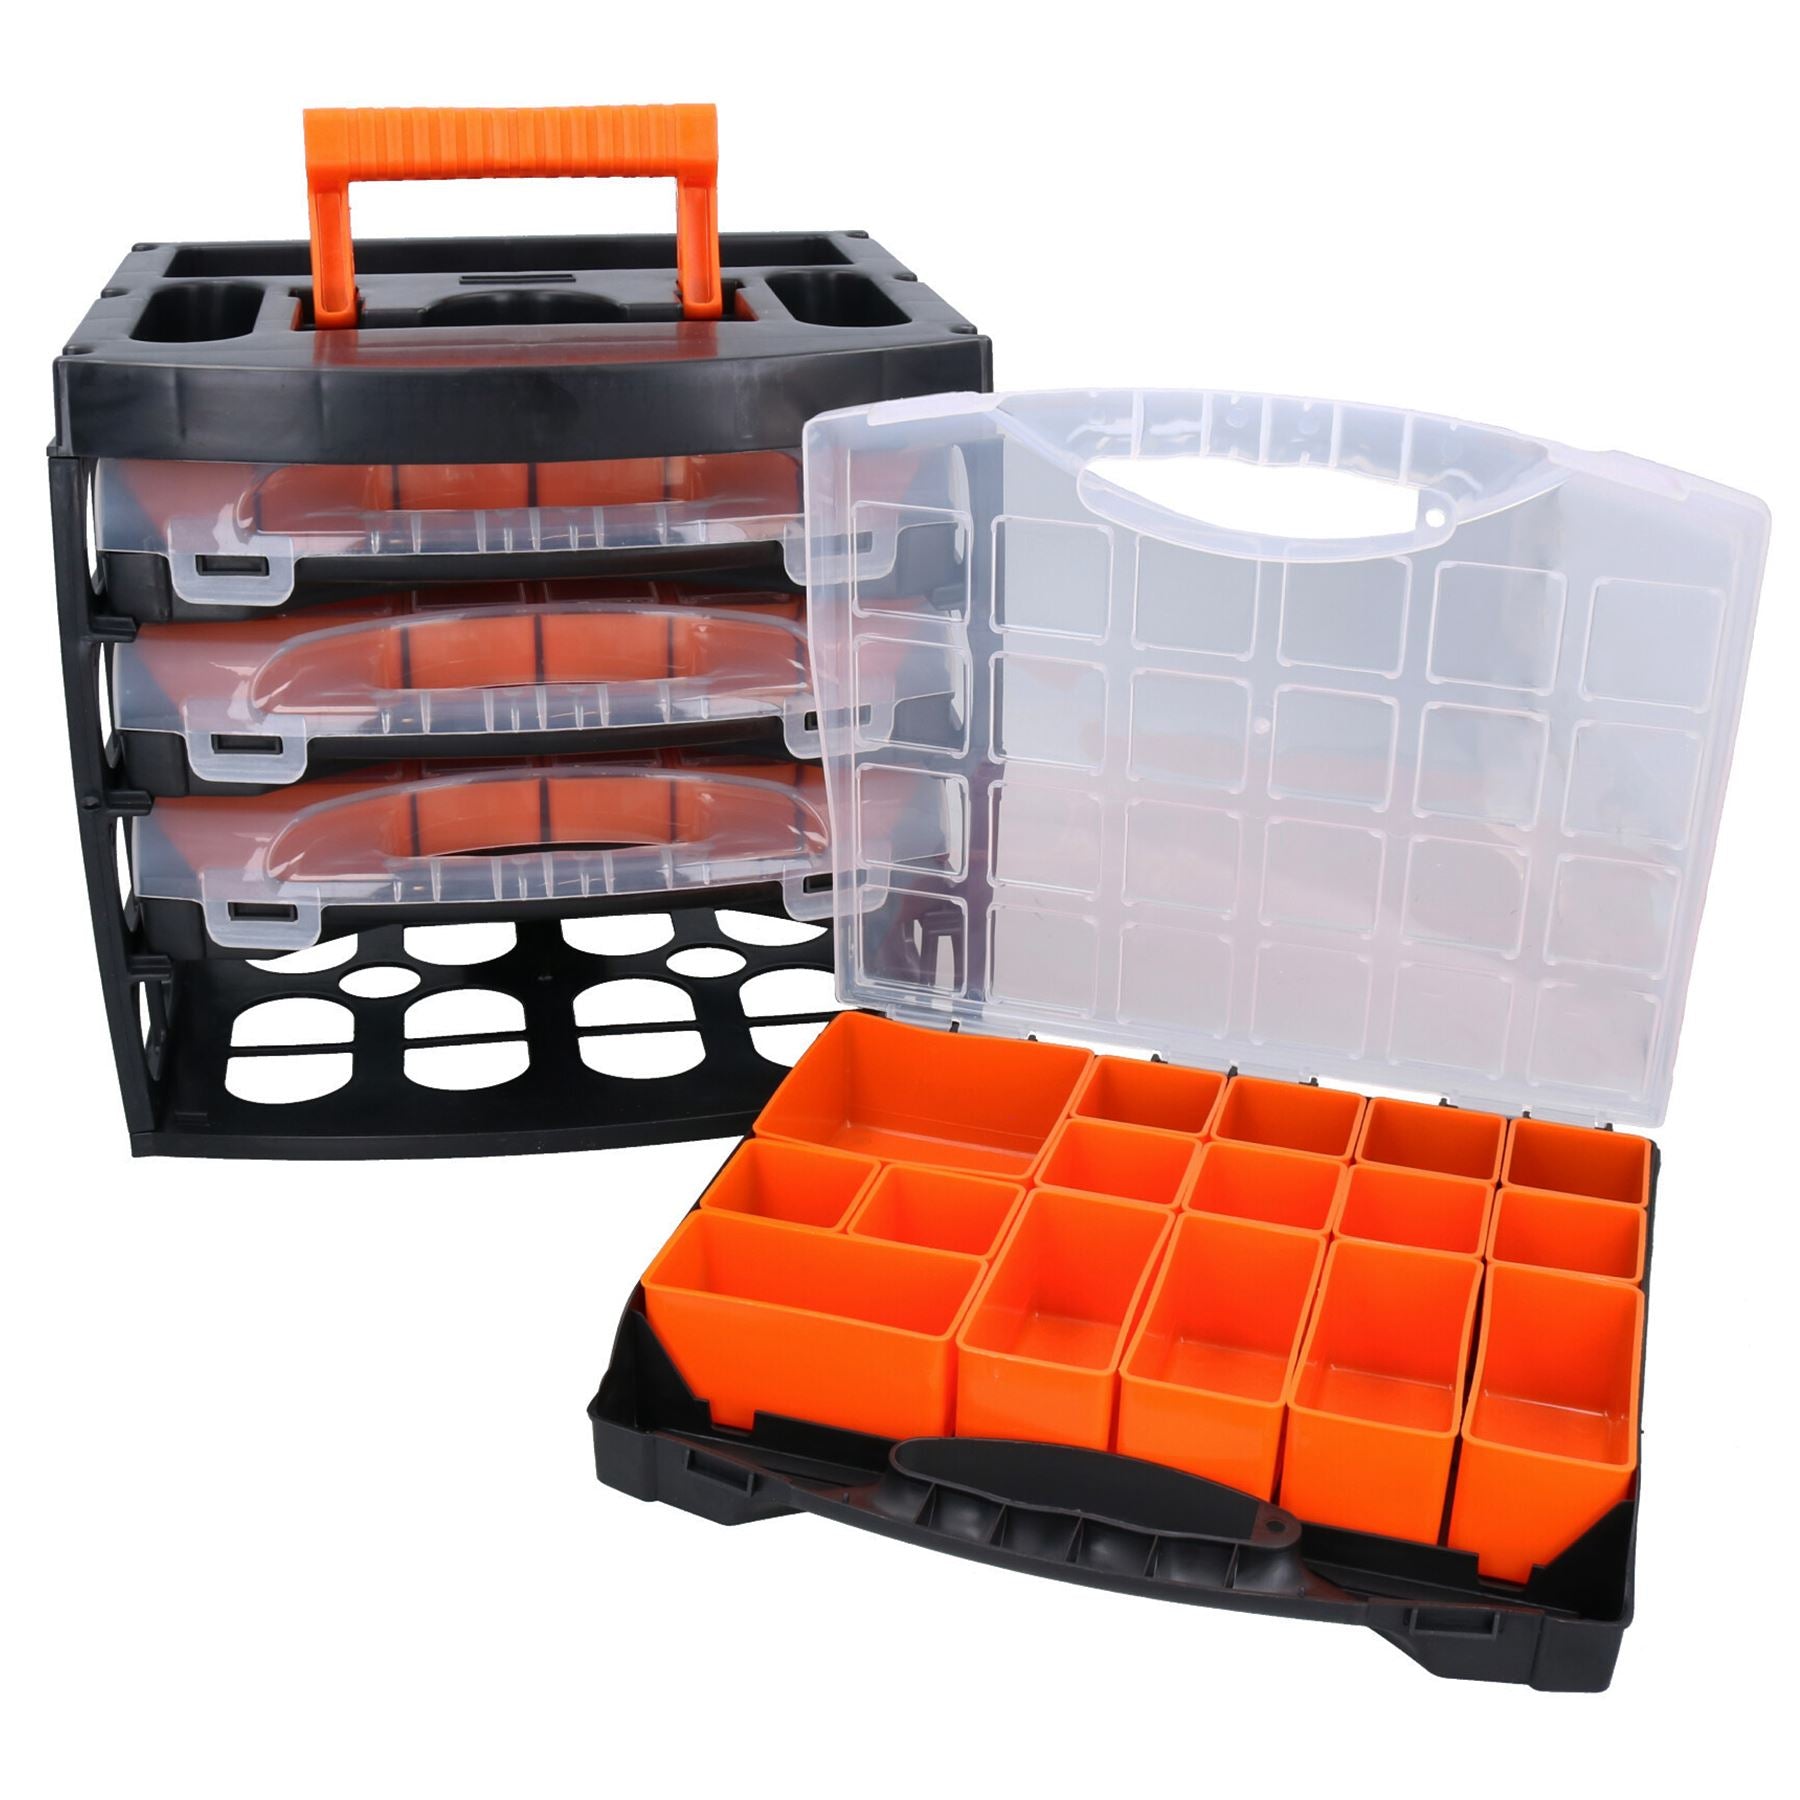 4 Tray Poly Tool Storage Organiser Case Holder with Removable Compartments